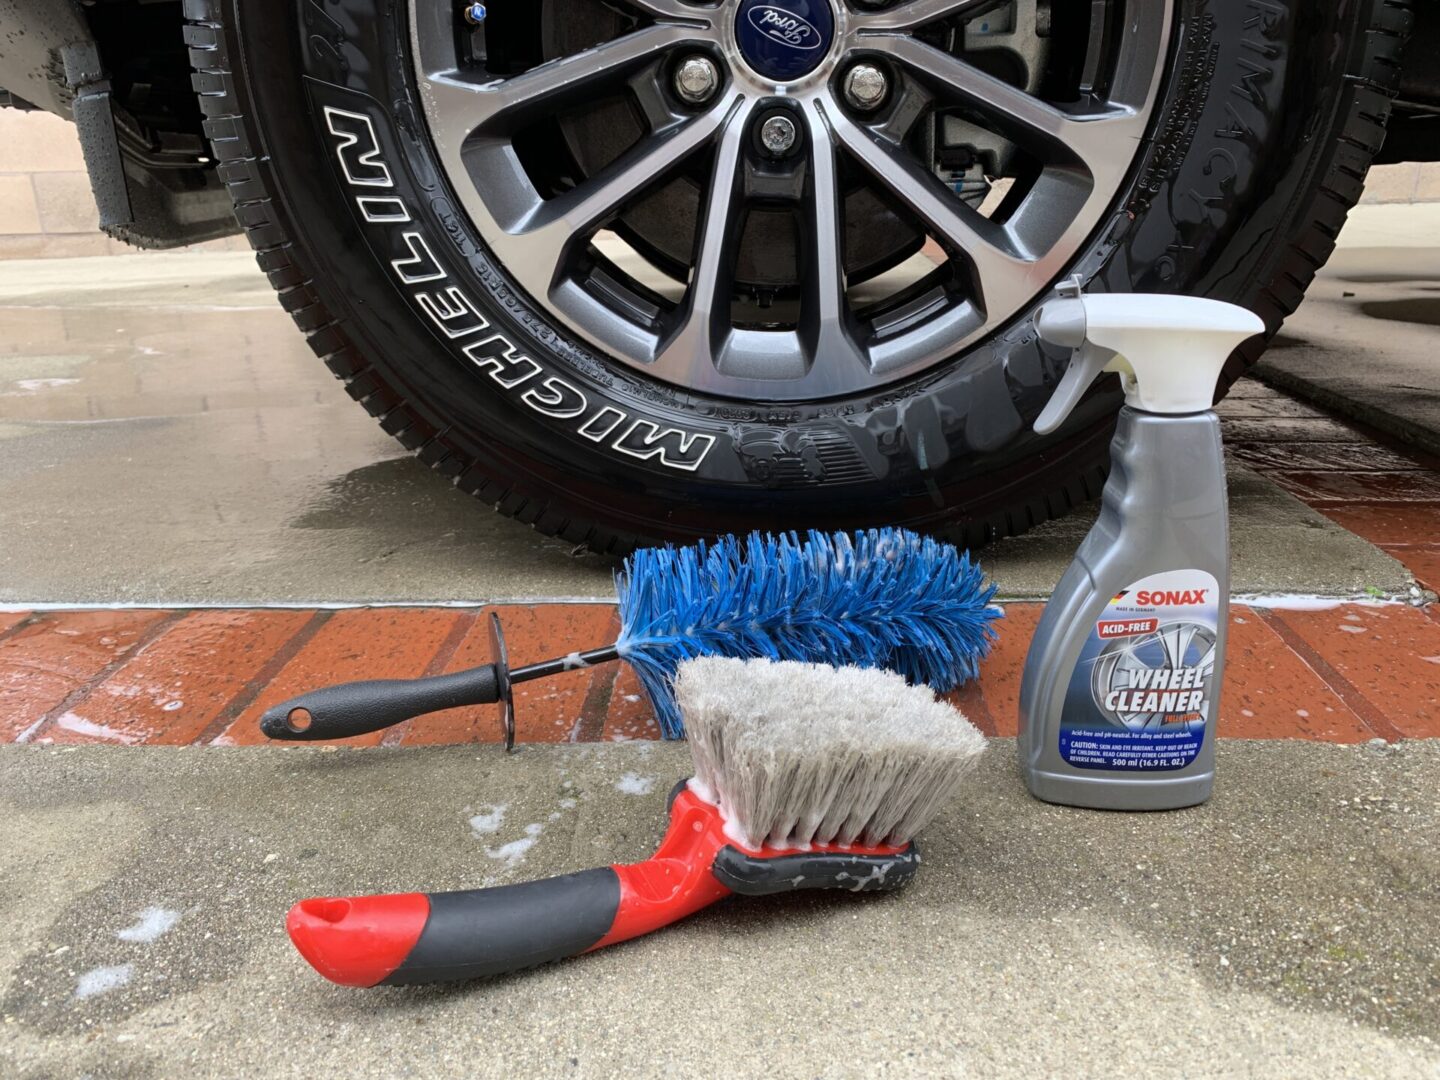 The Best Wheel Cleaner - Mothers vs Sonax 2021